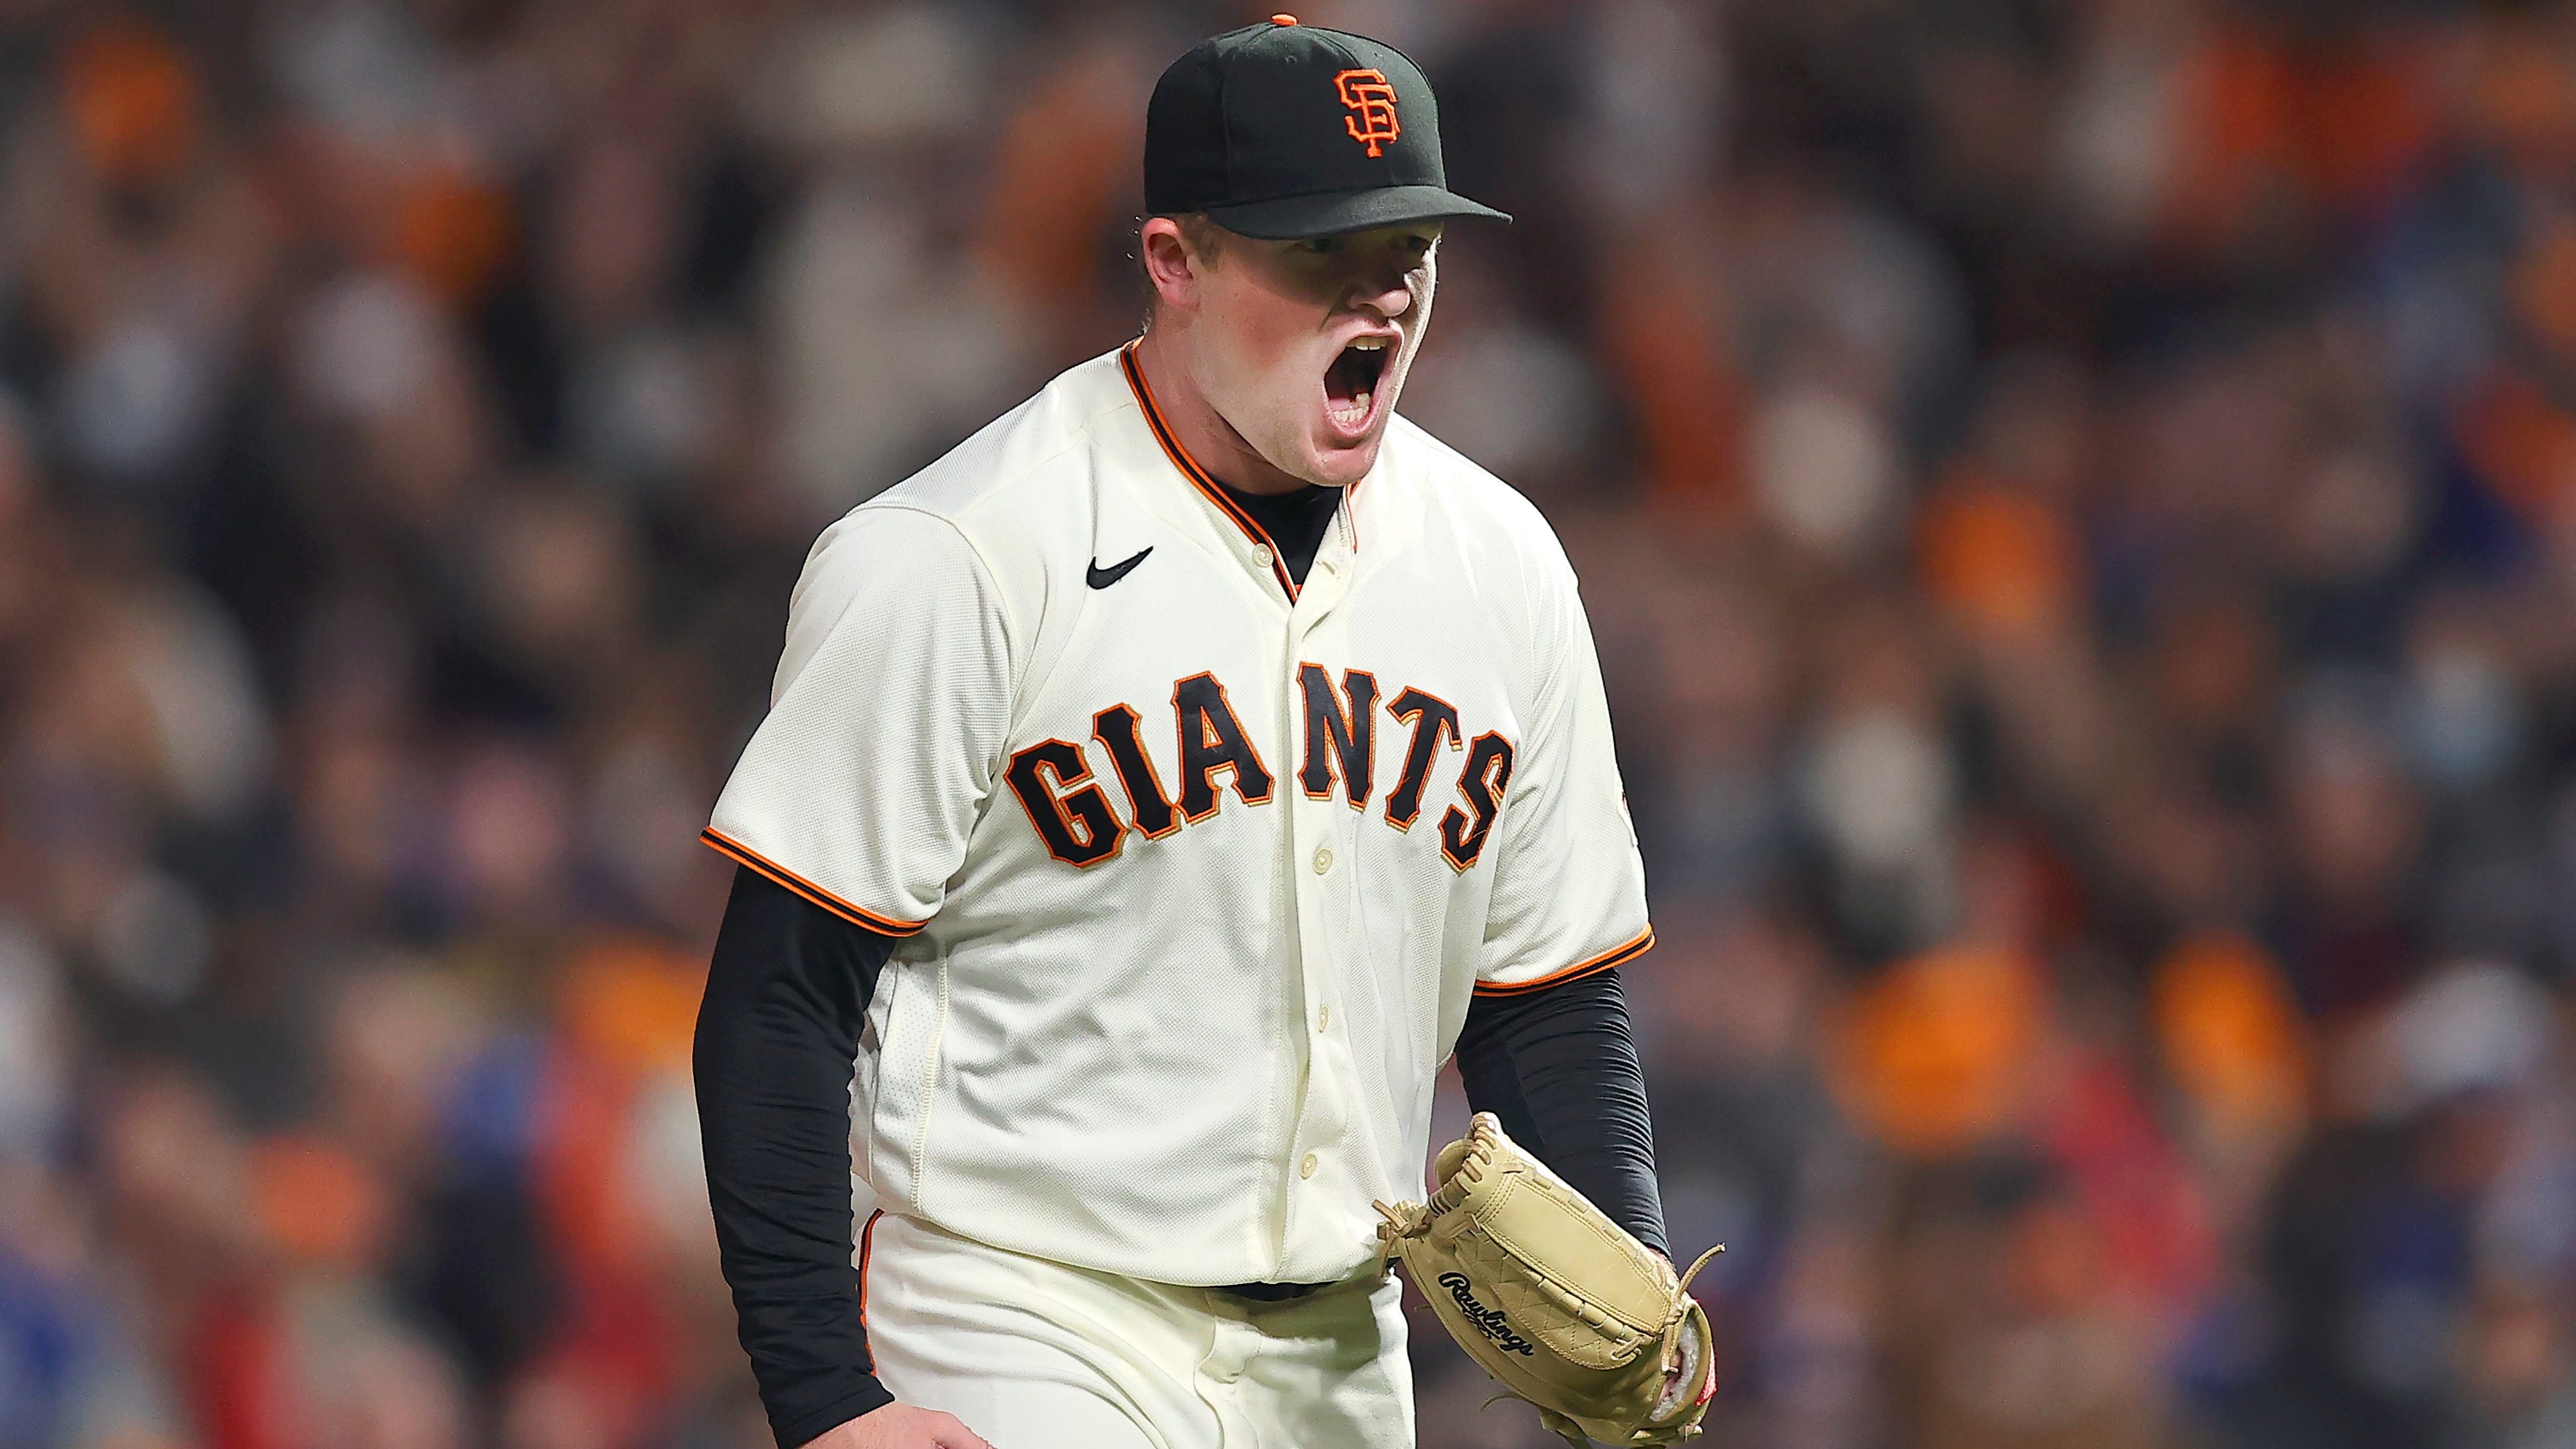 Giants beat rival Dodgers in NLDS Game 1 behind Logan Webb's gem